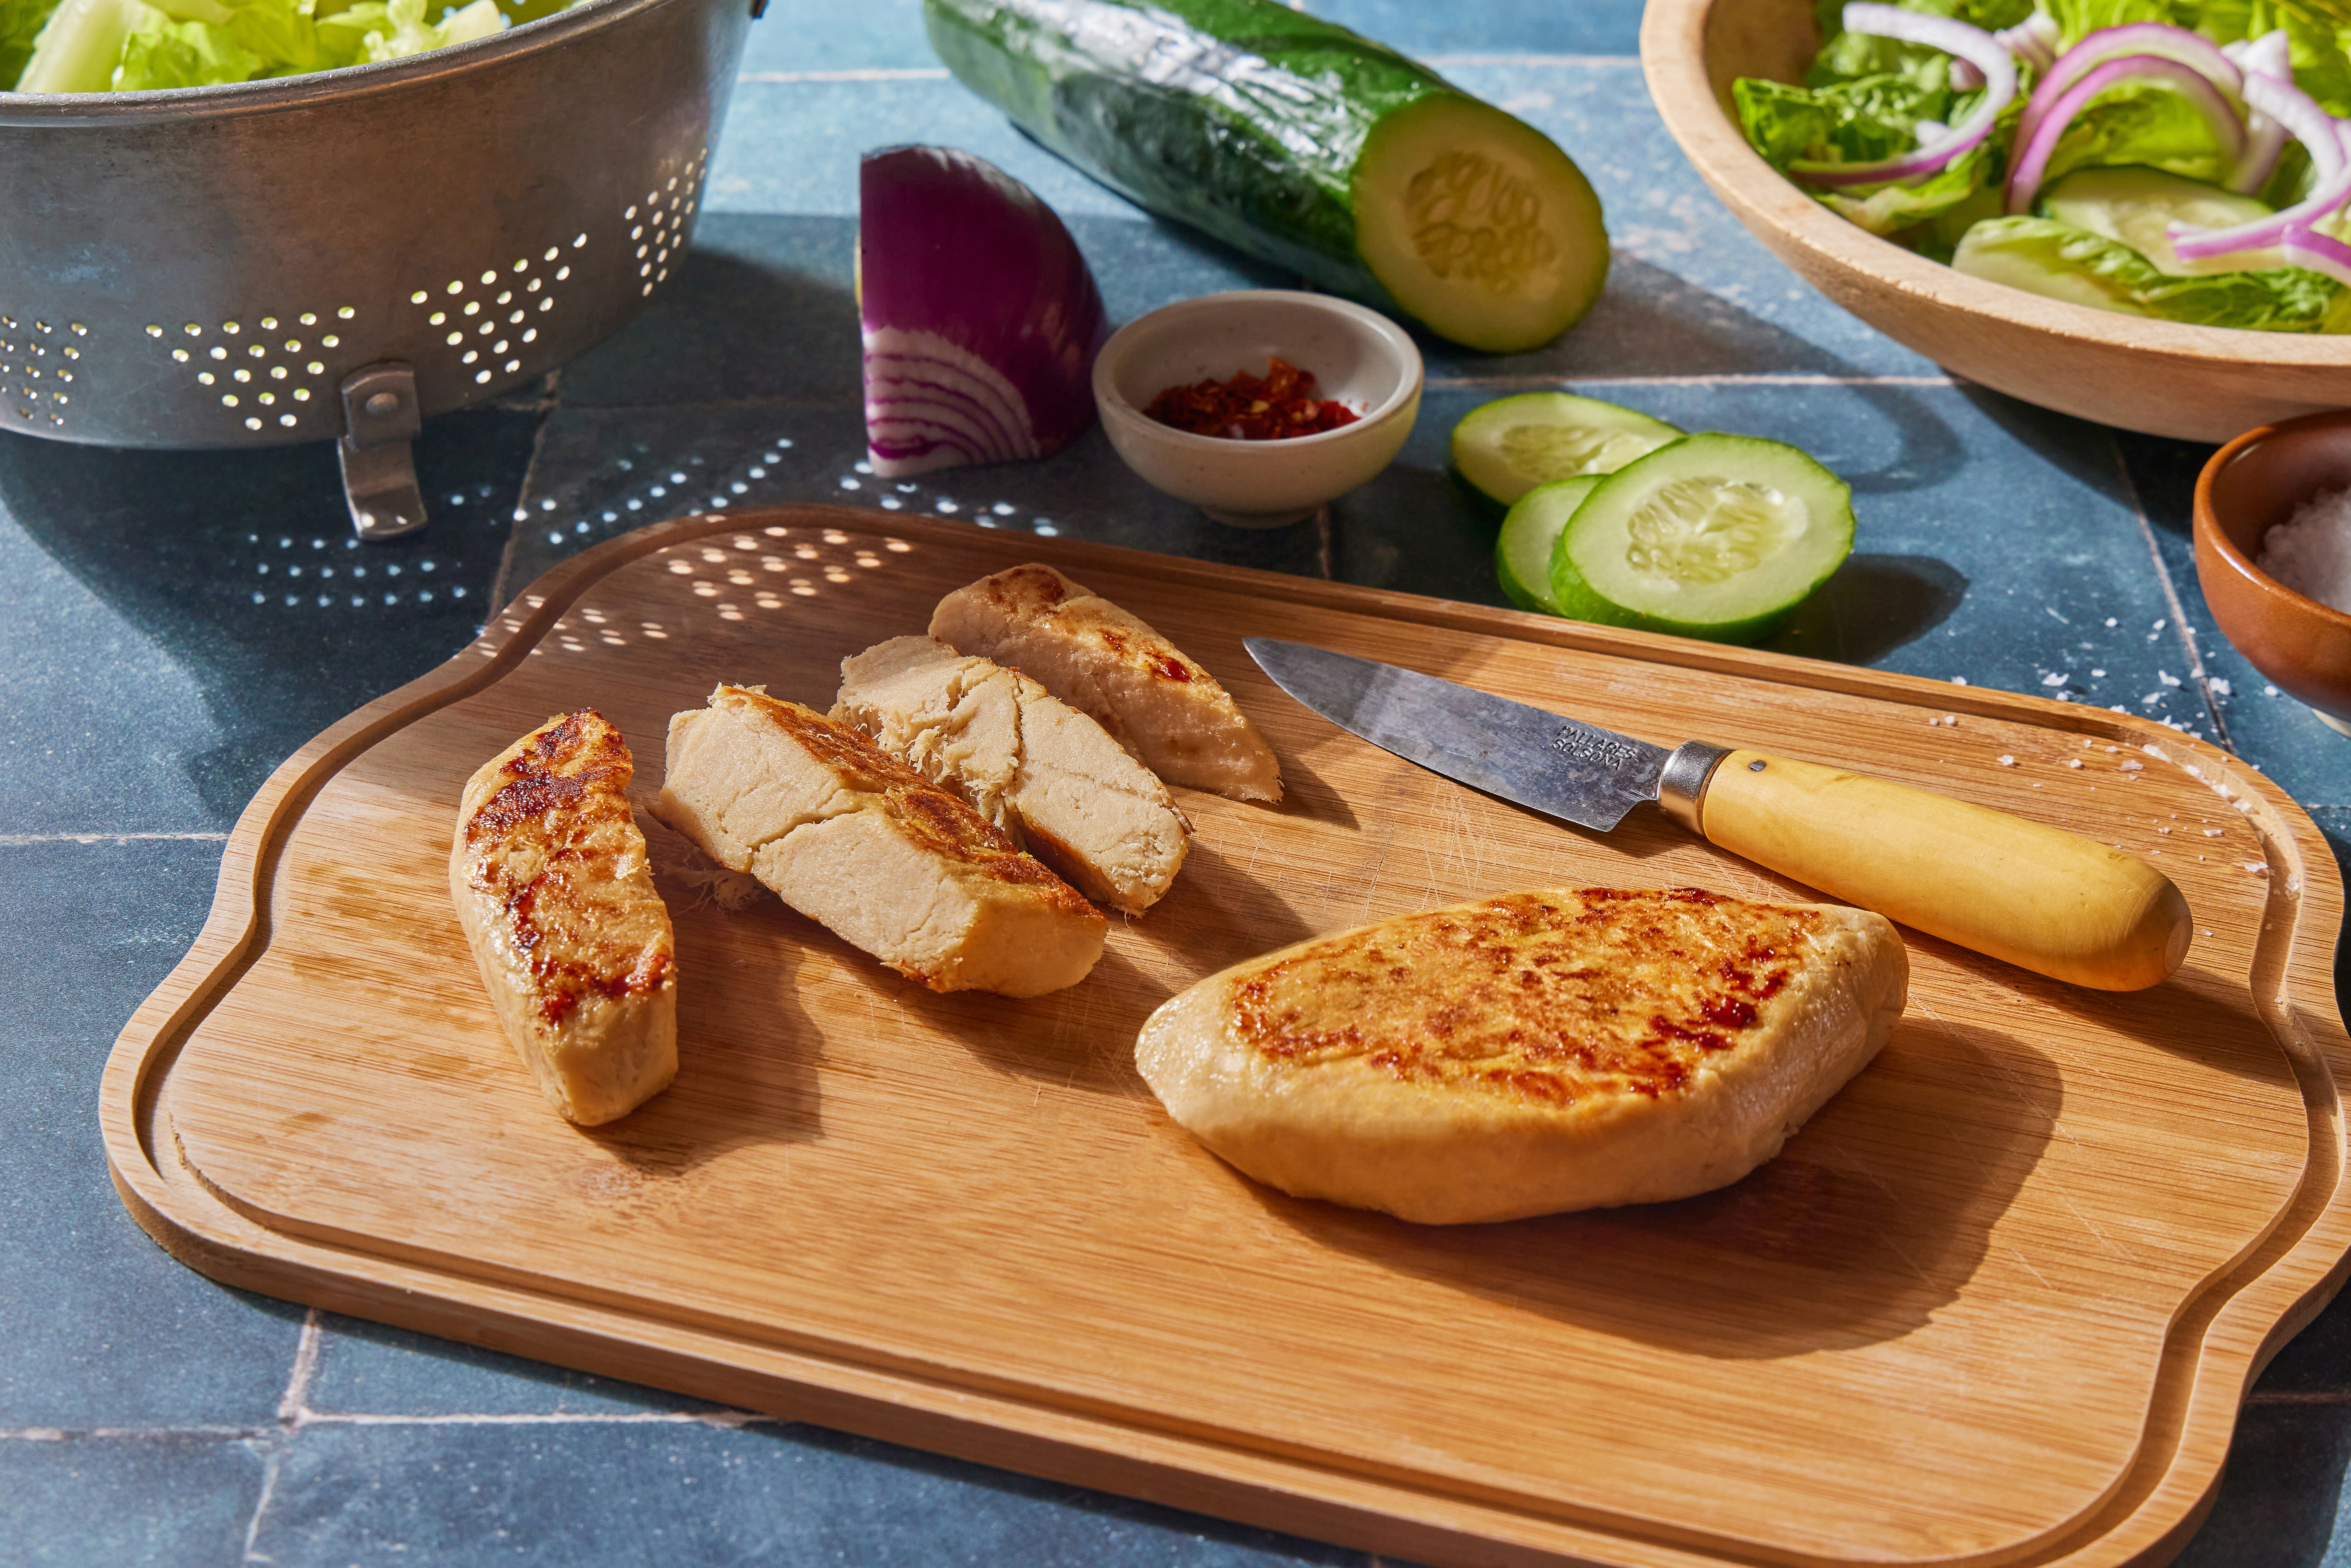 A wooden cutting board with sliced and whole pieces of Tender plant-based chicken breast. A knife with a wooden handle rests beside the chicken.